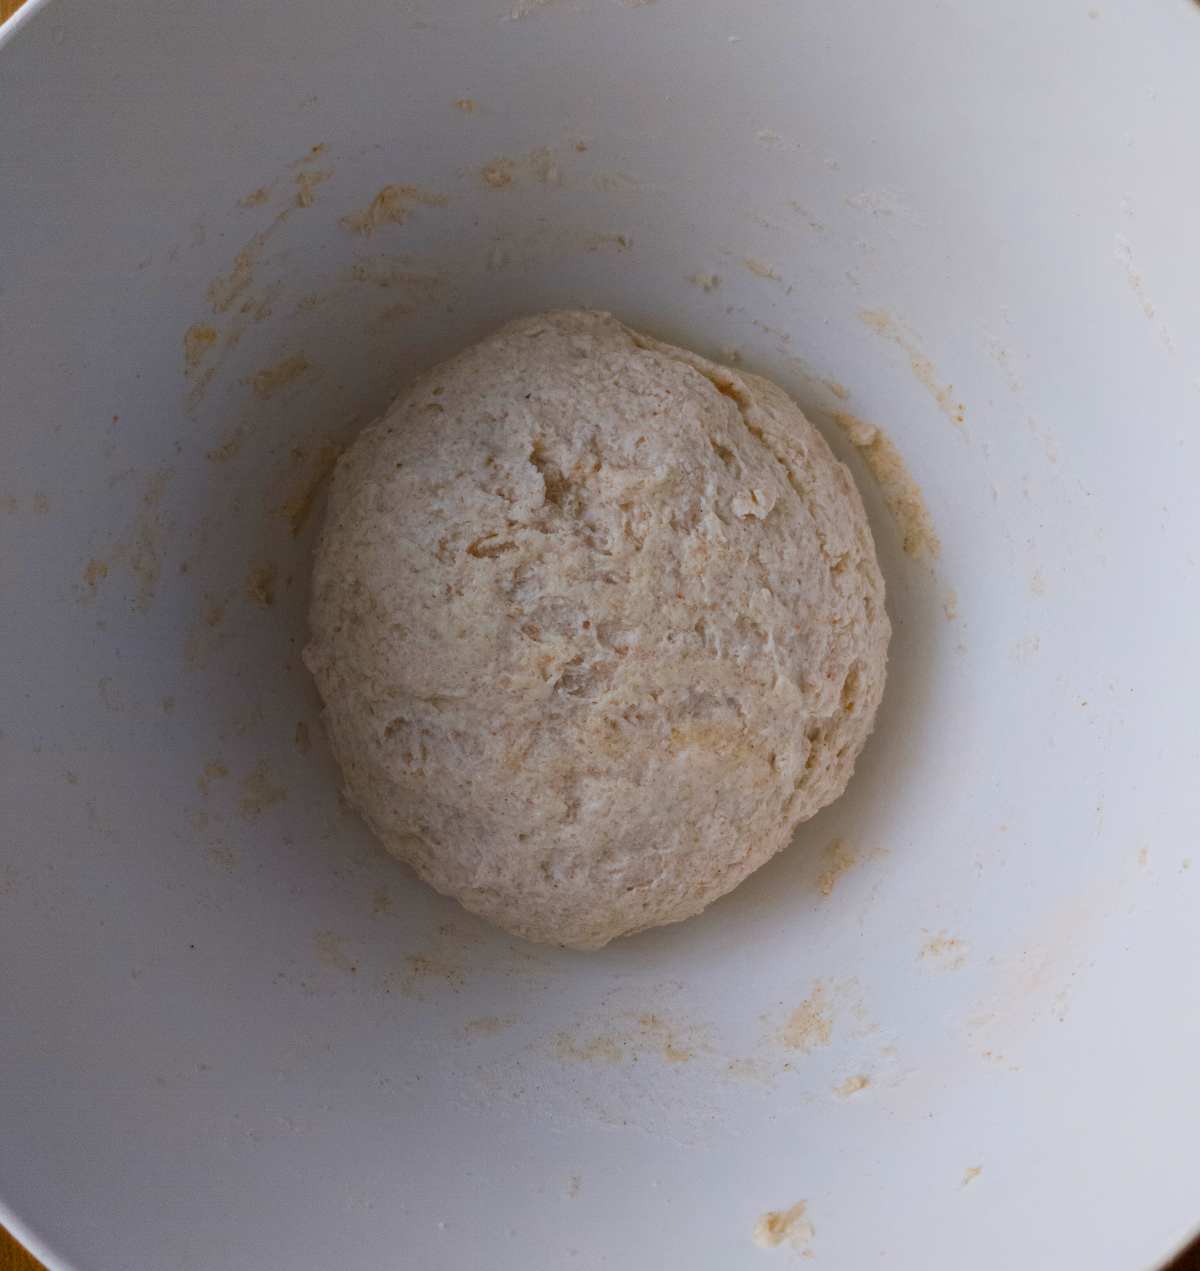 The dough formed into a ball inside the mixing bowl.